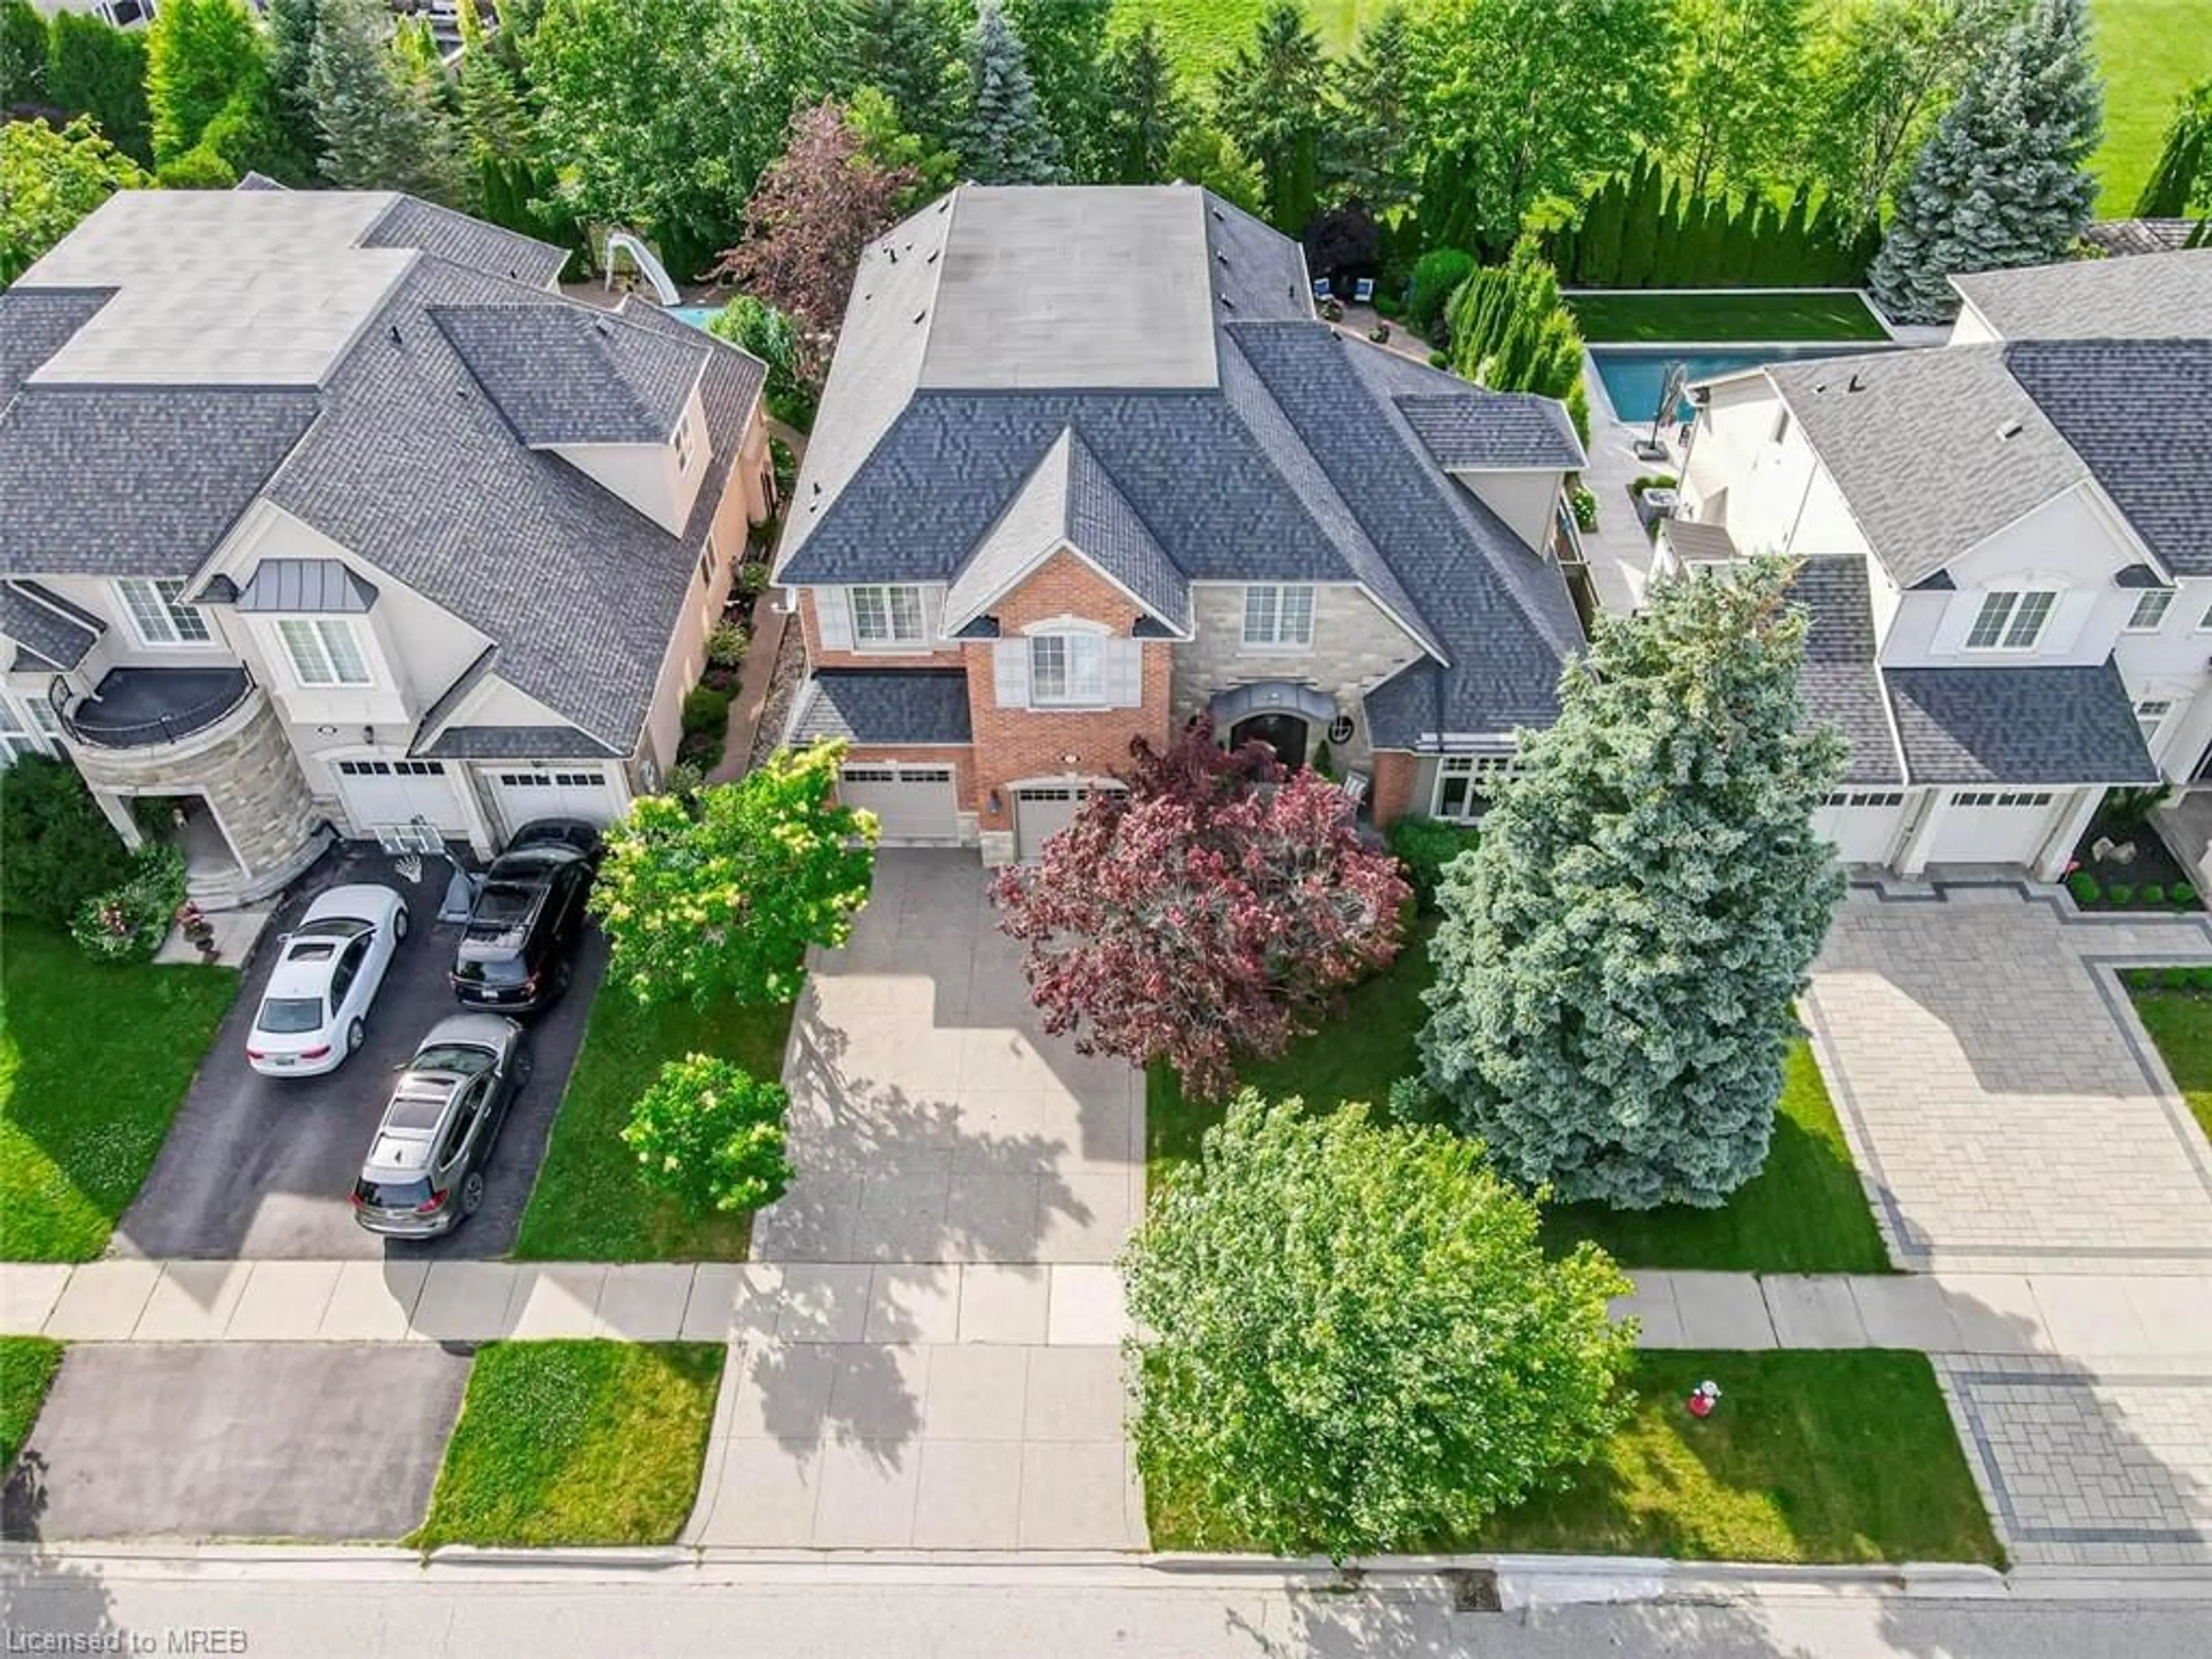 Frontside or backside of a home for 645 Canyon St, Mississauga Ontario L5H 4L9